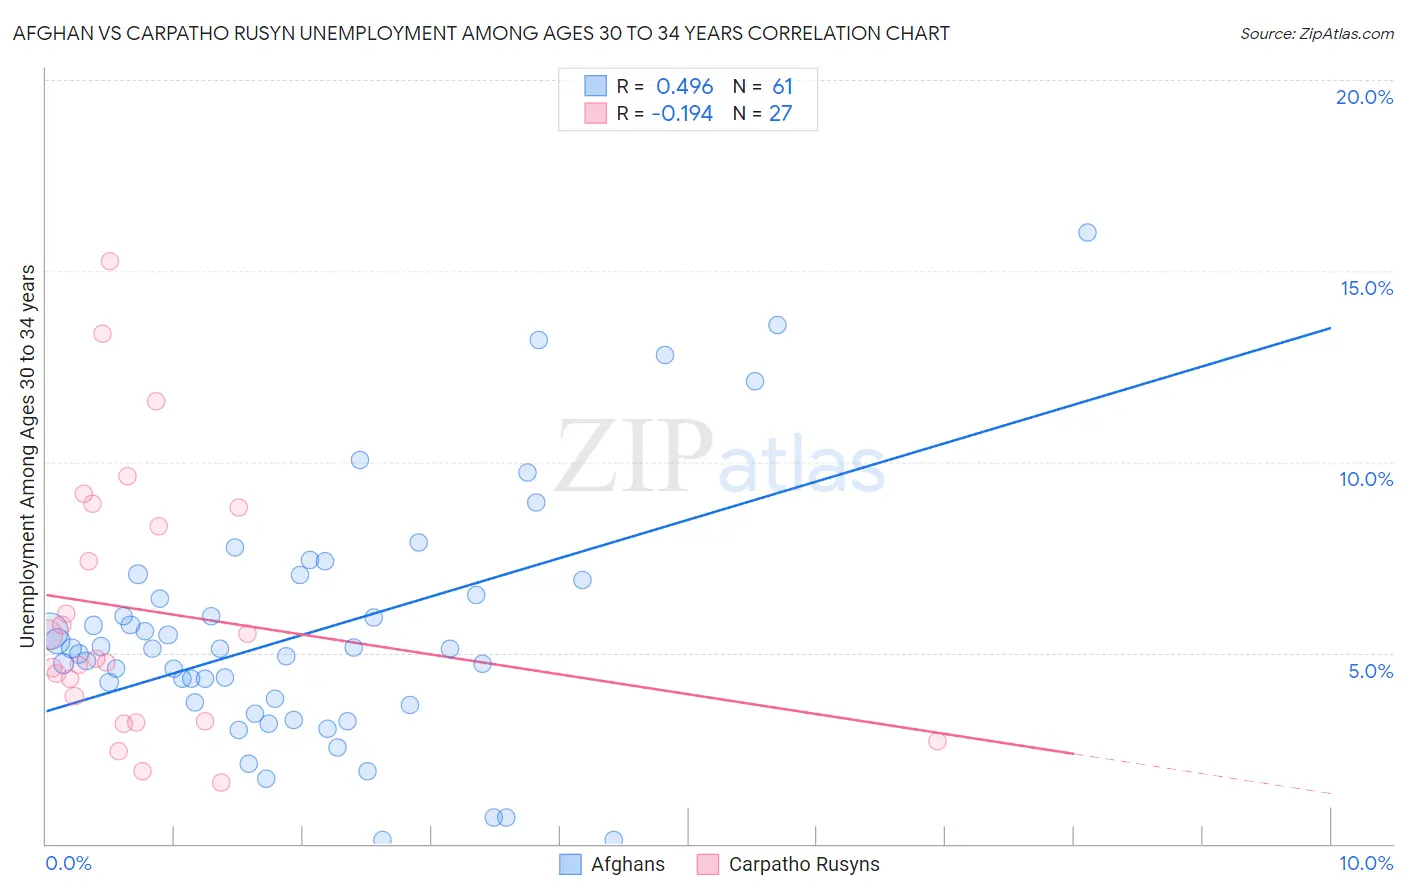 Afghan vs Carpatho Rusyn Unemployment Among Ages 30 to 34 years